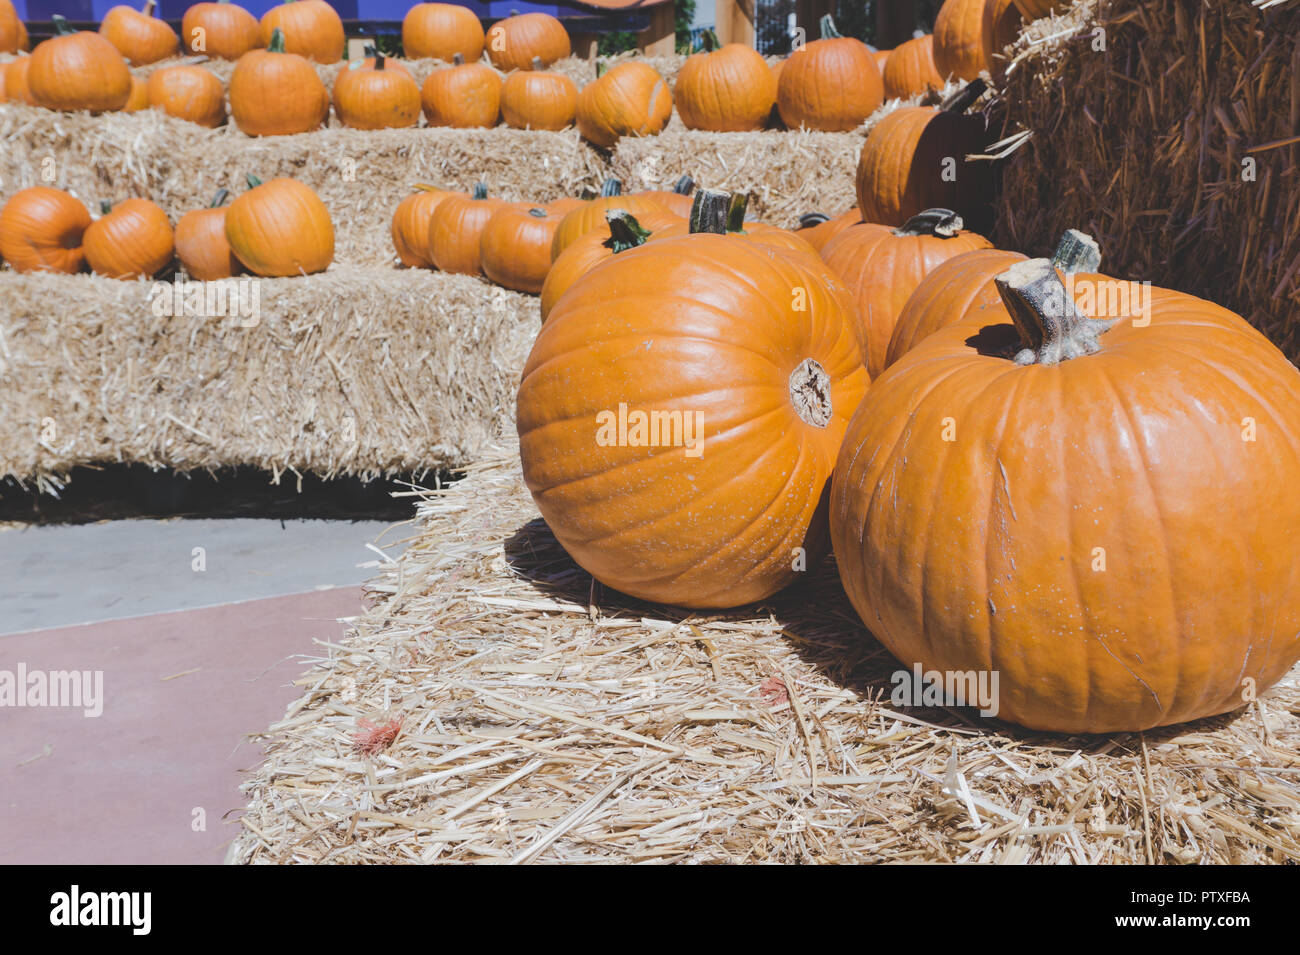 Autumnal display of big orange pumpkins on bales of hay. Classic fall scene in the United States in preparation for Halloween and Thanksgiving. Stock Photo